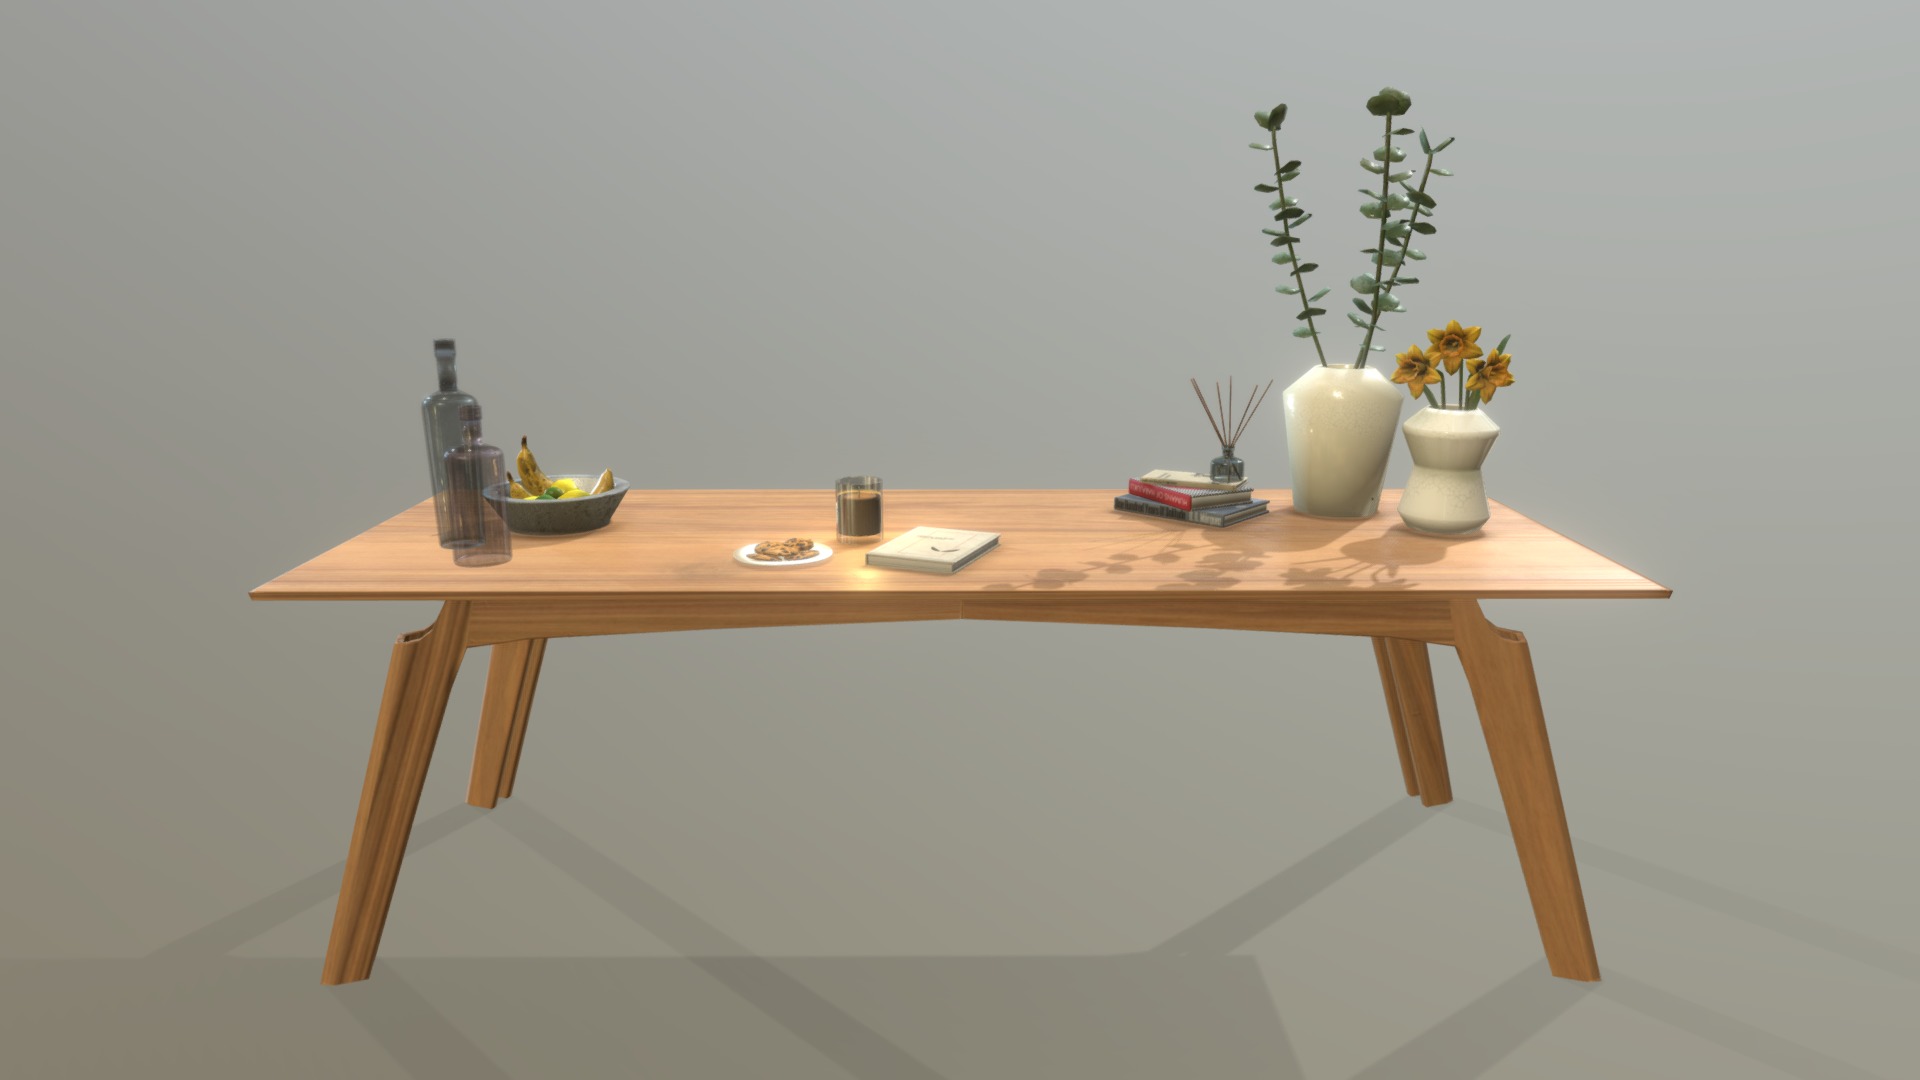 3D model Dining Table Asset Pack - This is a 3D model of the Dining Table Asset Pack. The 3D model is about a table with a vase of flowers and other objects on it.